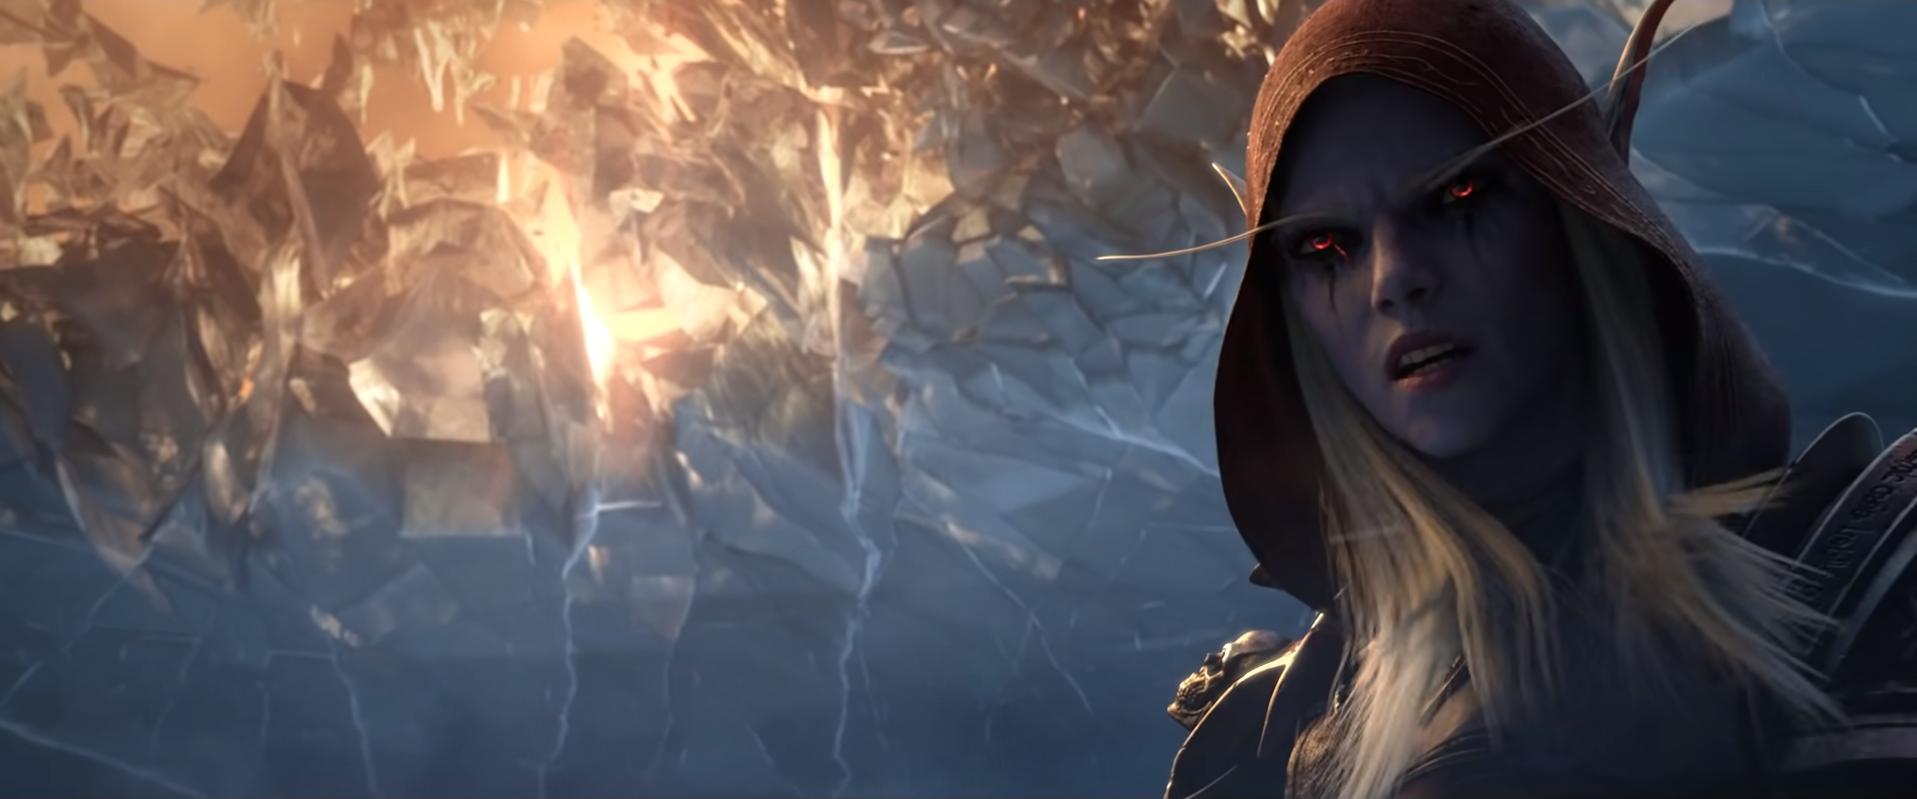 World of Warcraft: Shadowlands will finally arrive later this year, according to Blizzard's last quarterly report.